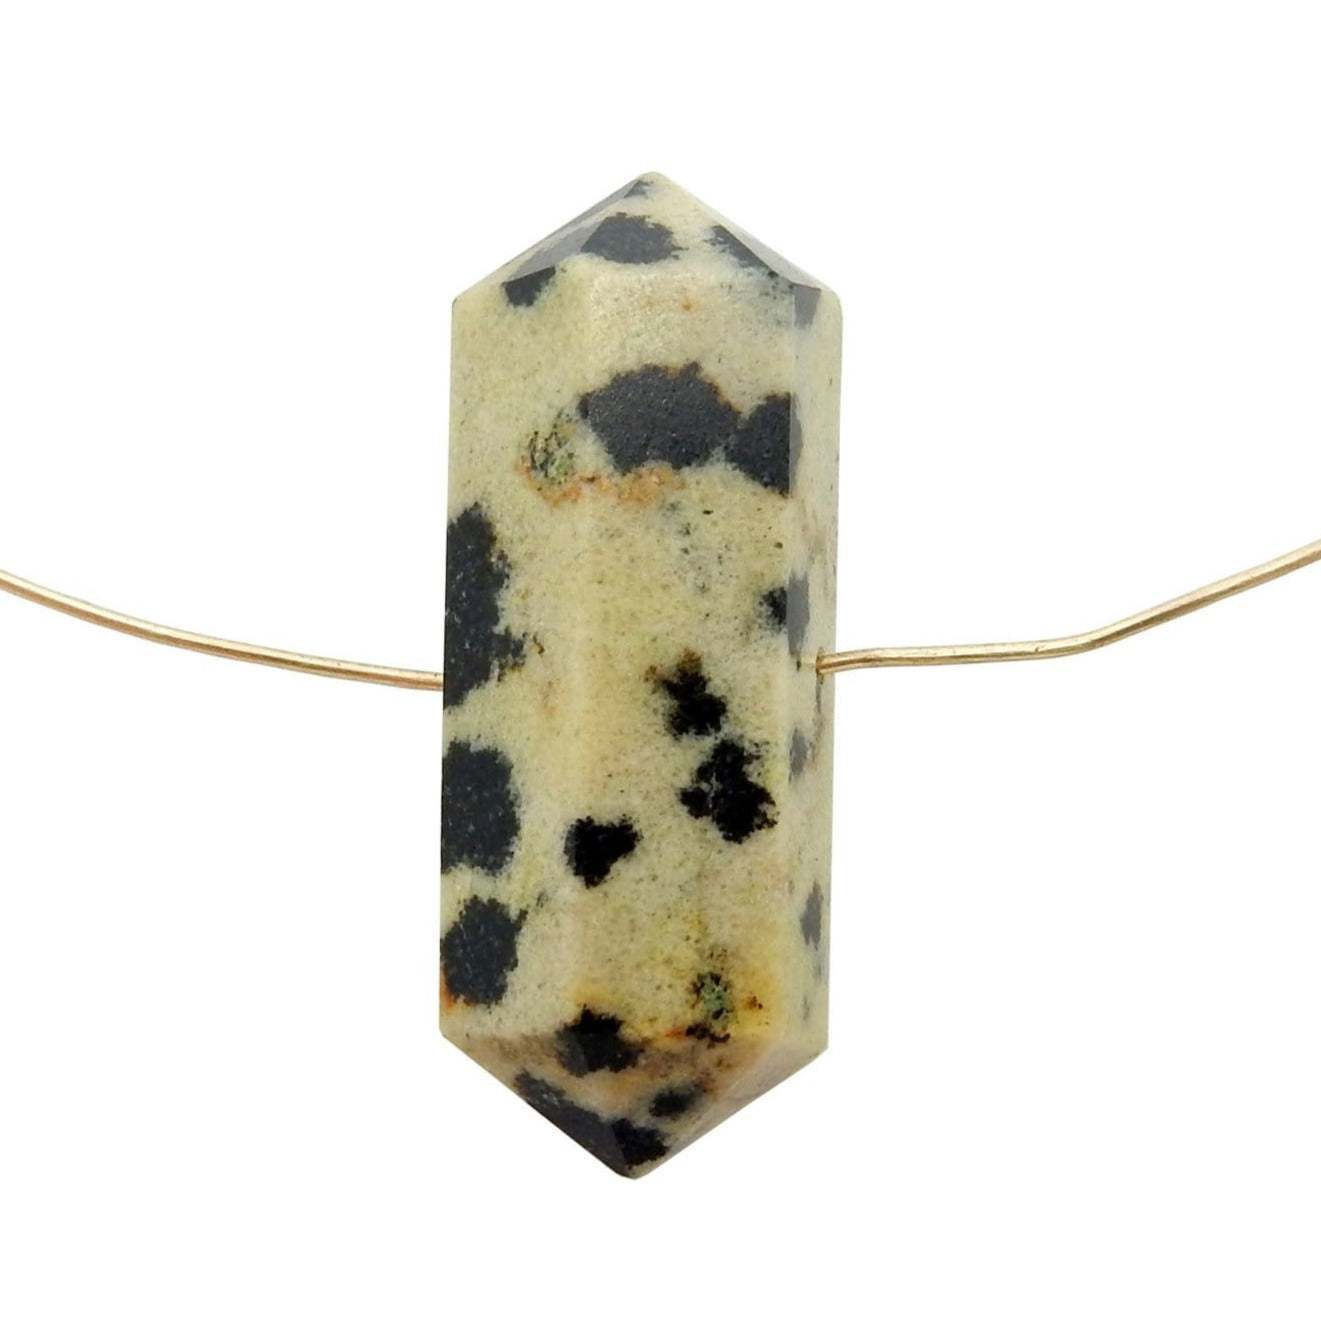 Petite Dalmatian Jasper Double Terminated Pencil Point with wire through the drilled center hole